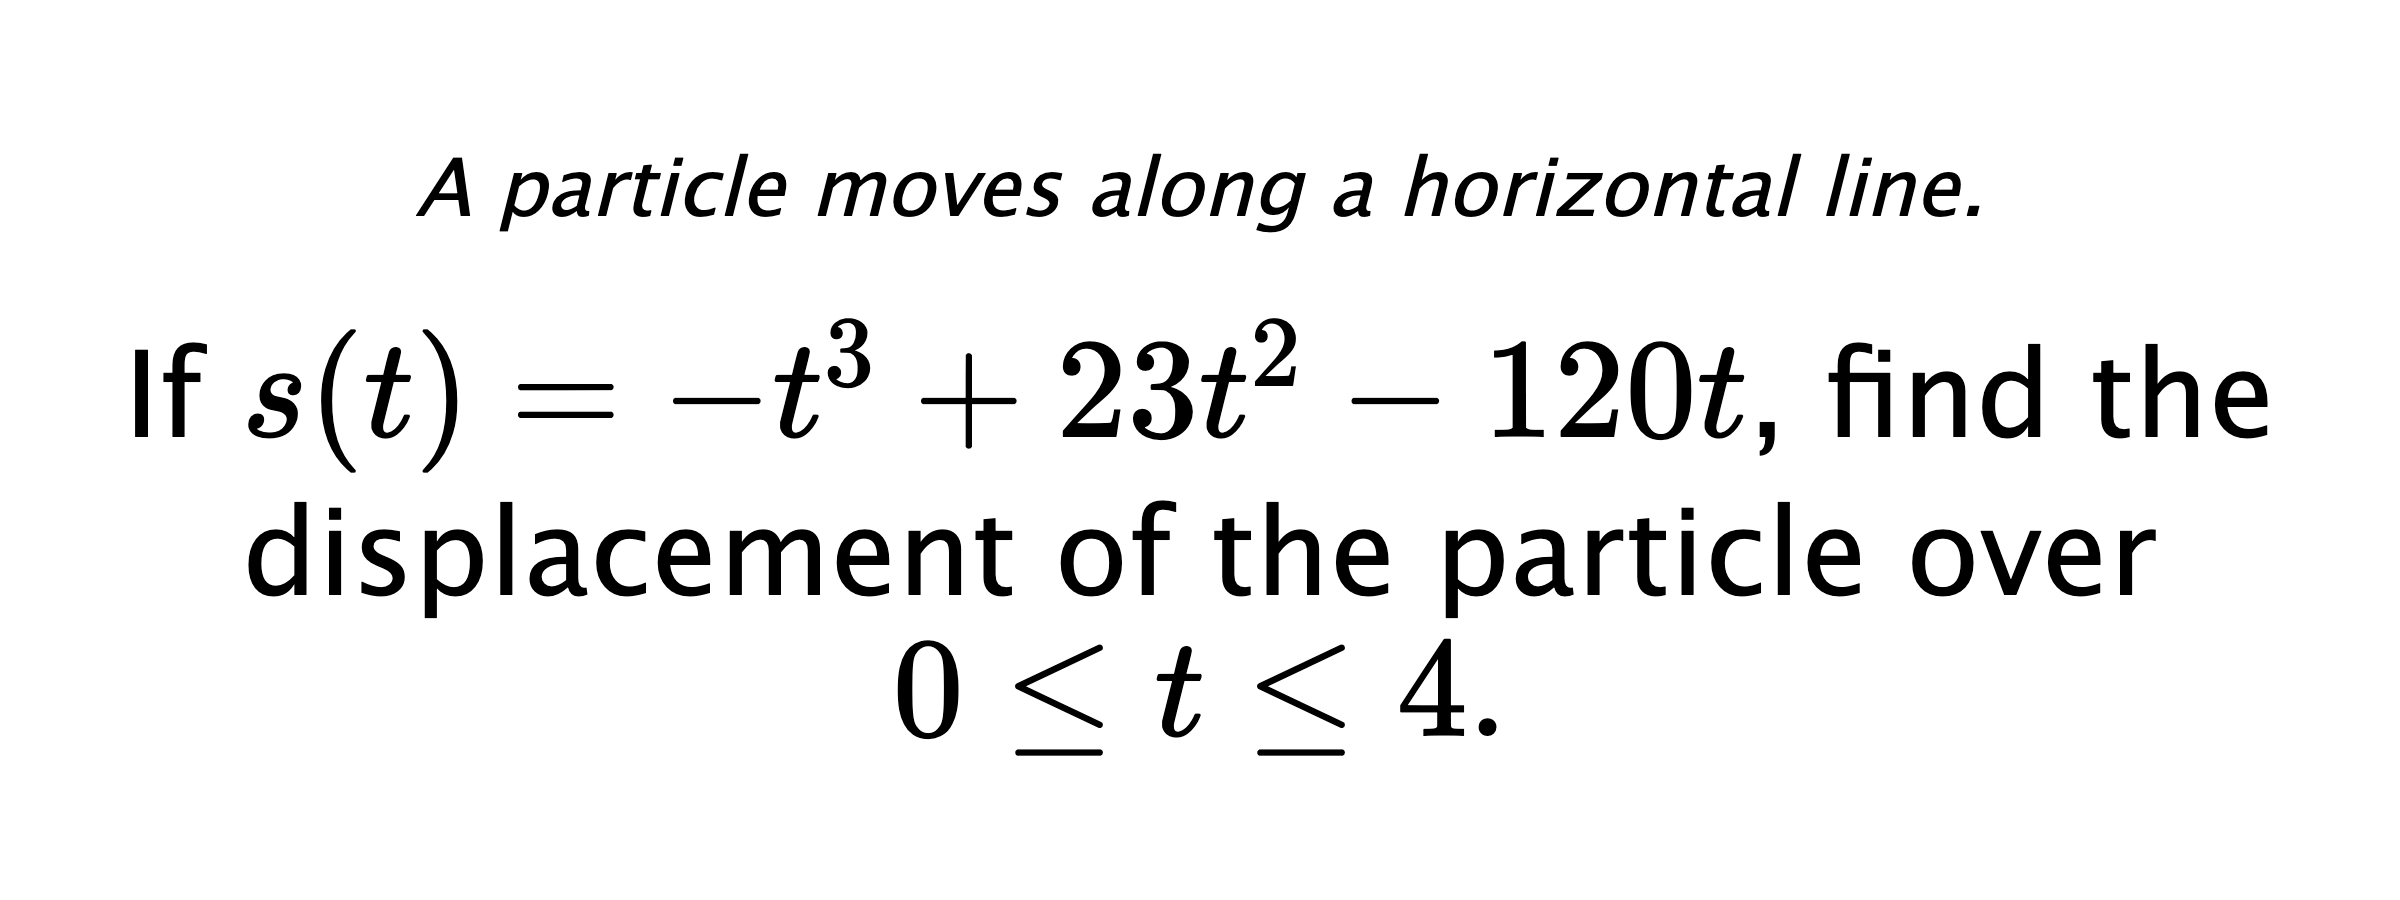 A particle moves along a horizontal line. If $ s(t)=-t^3+23t^2-120t $, find the displacement of the particle over $ 0 \leq t \leq 4. $